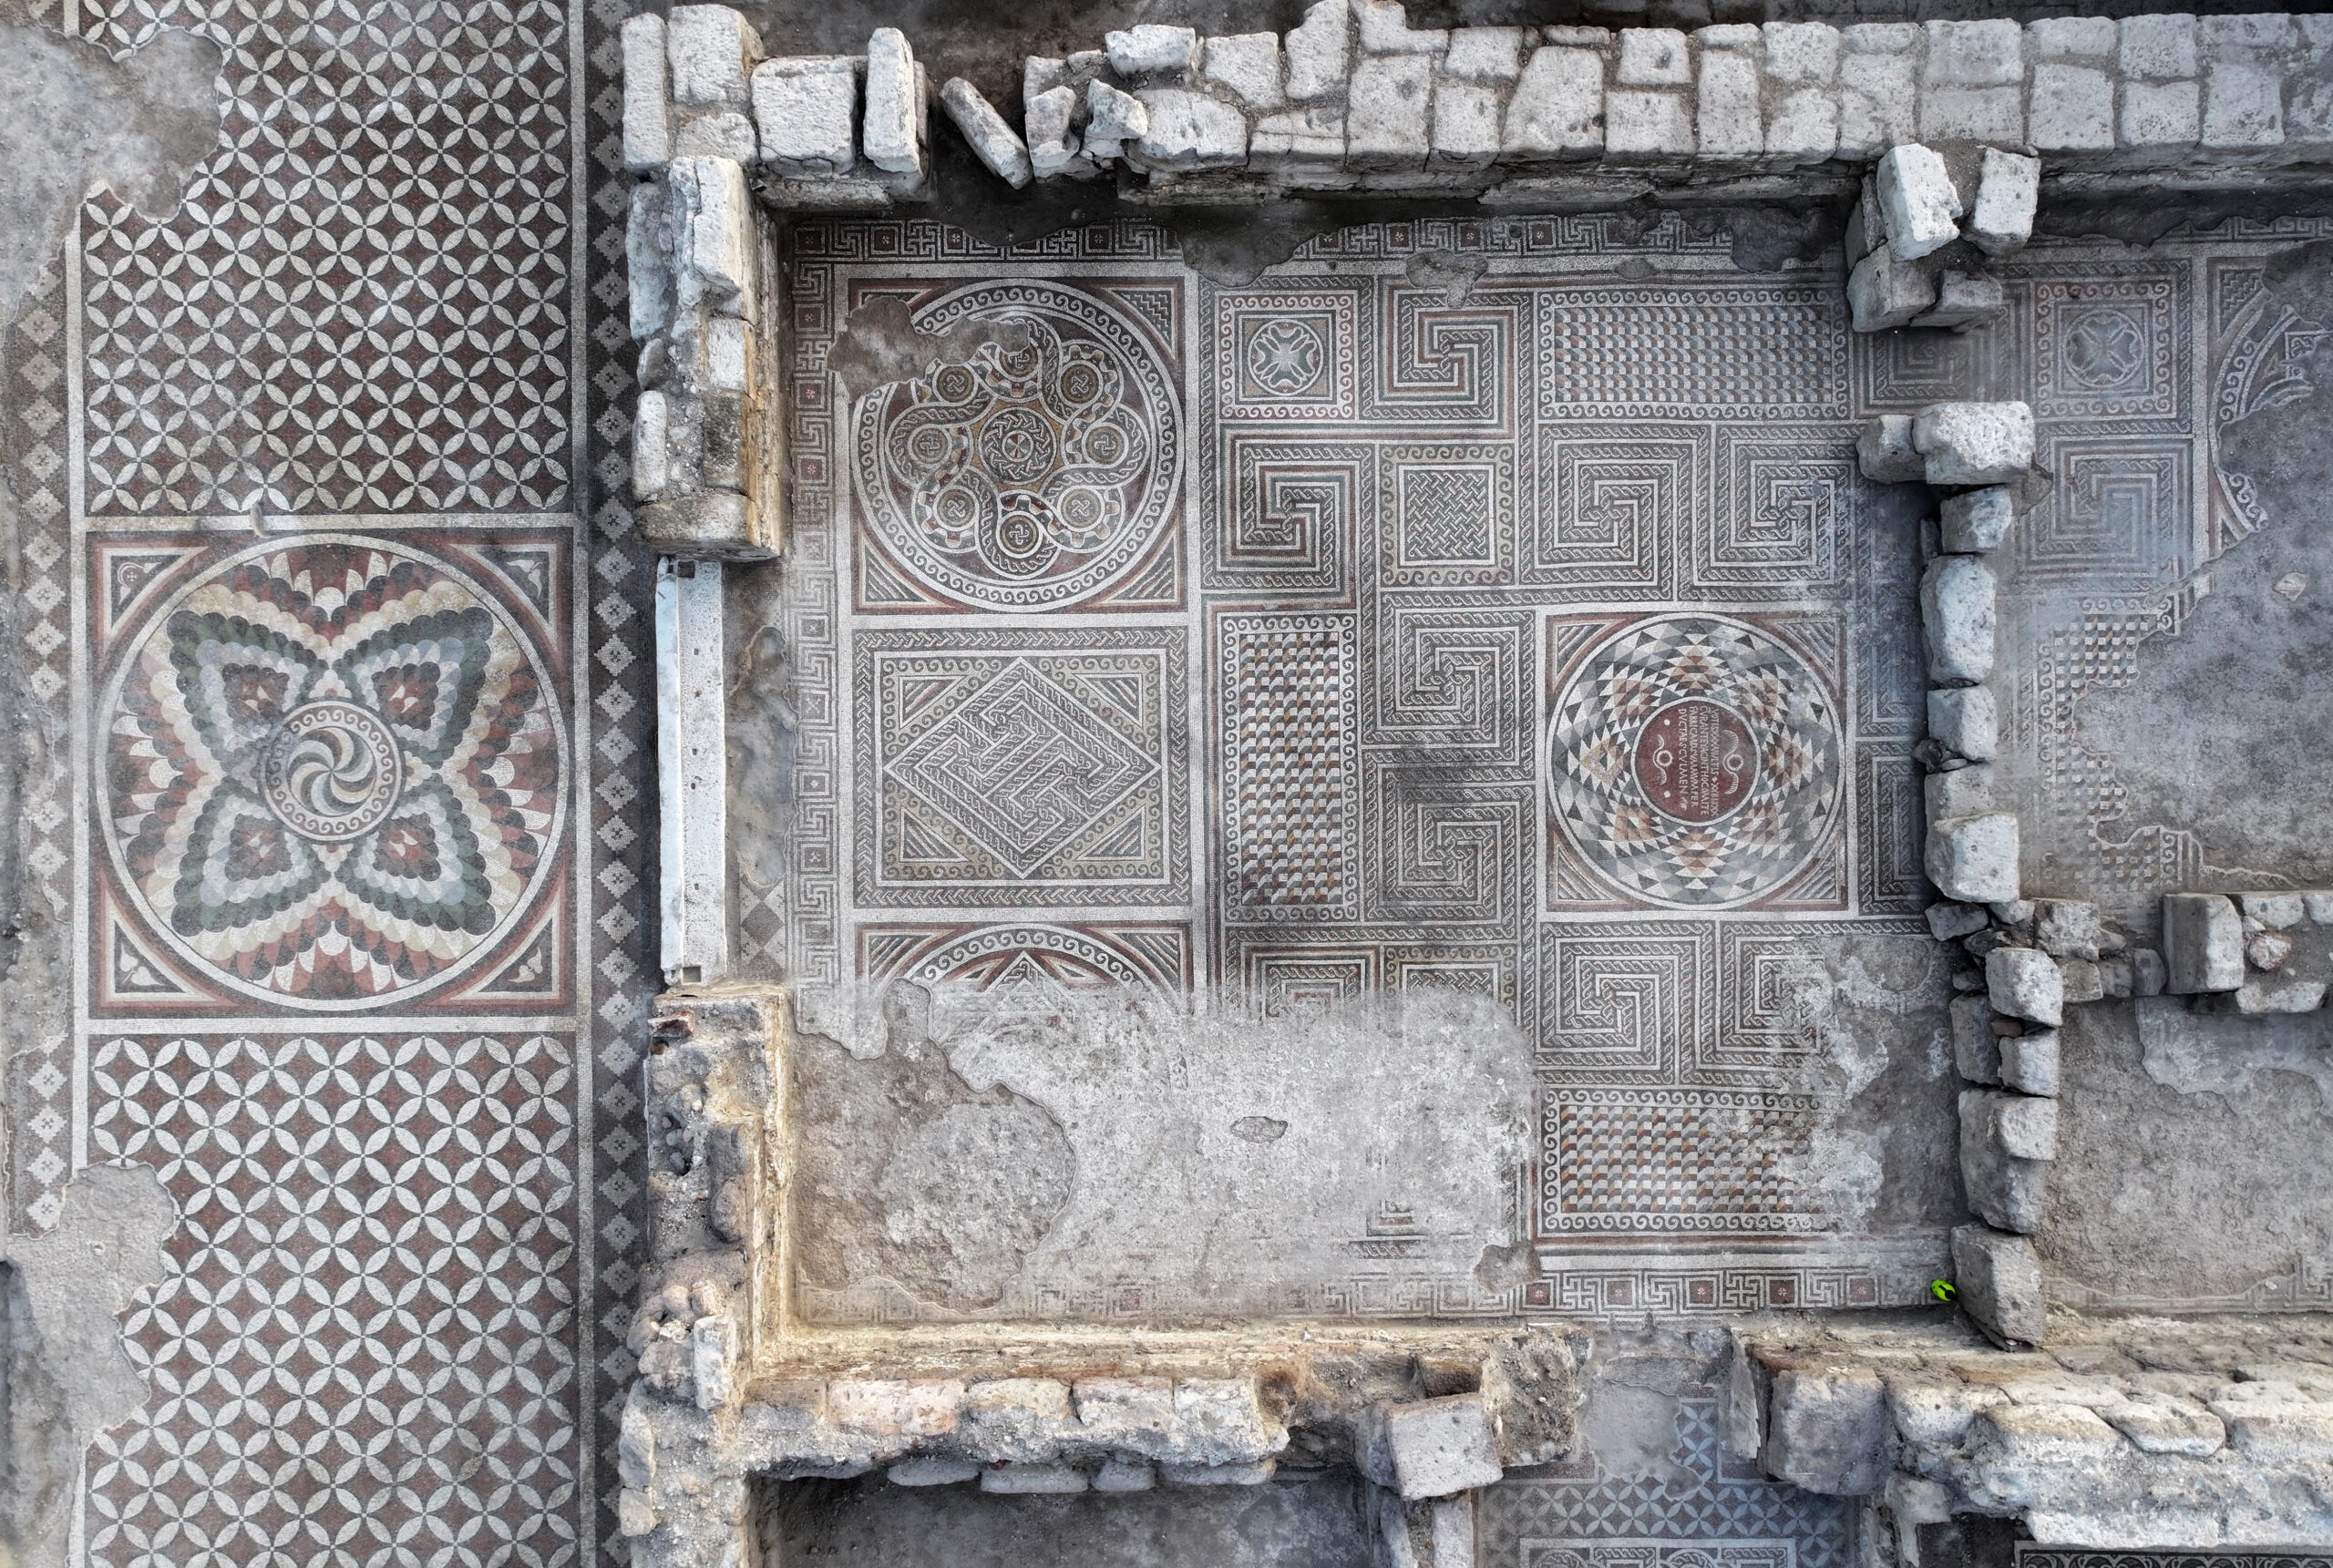 Largest mosaic floor in Anatolia keeps getting larger